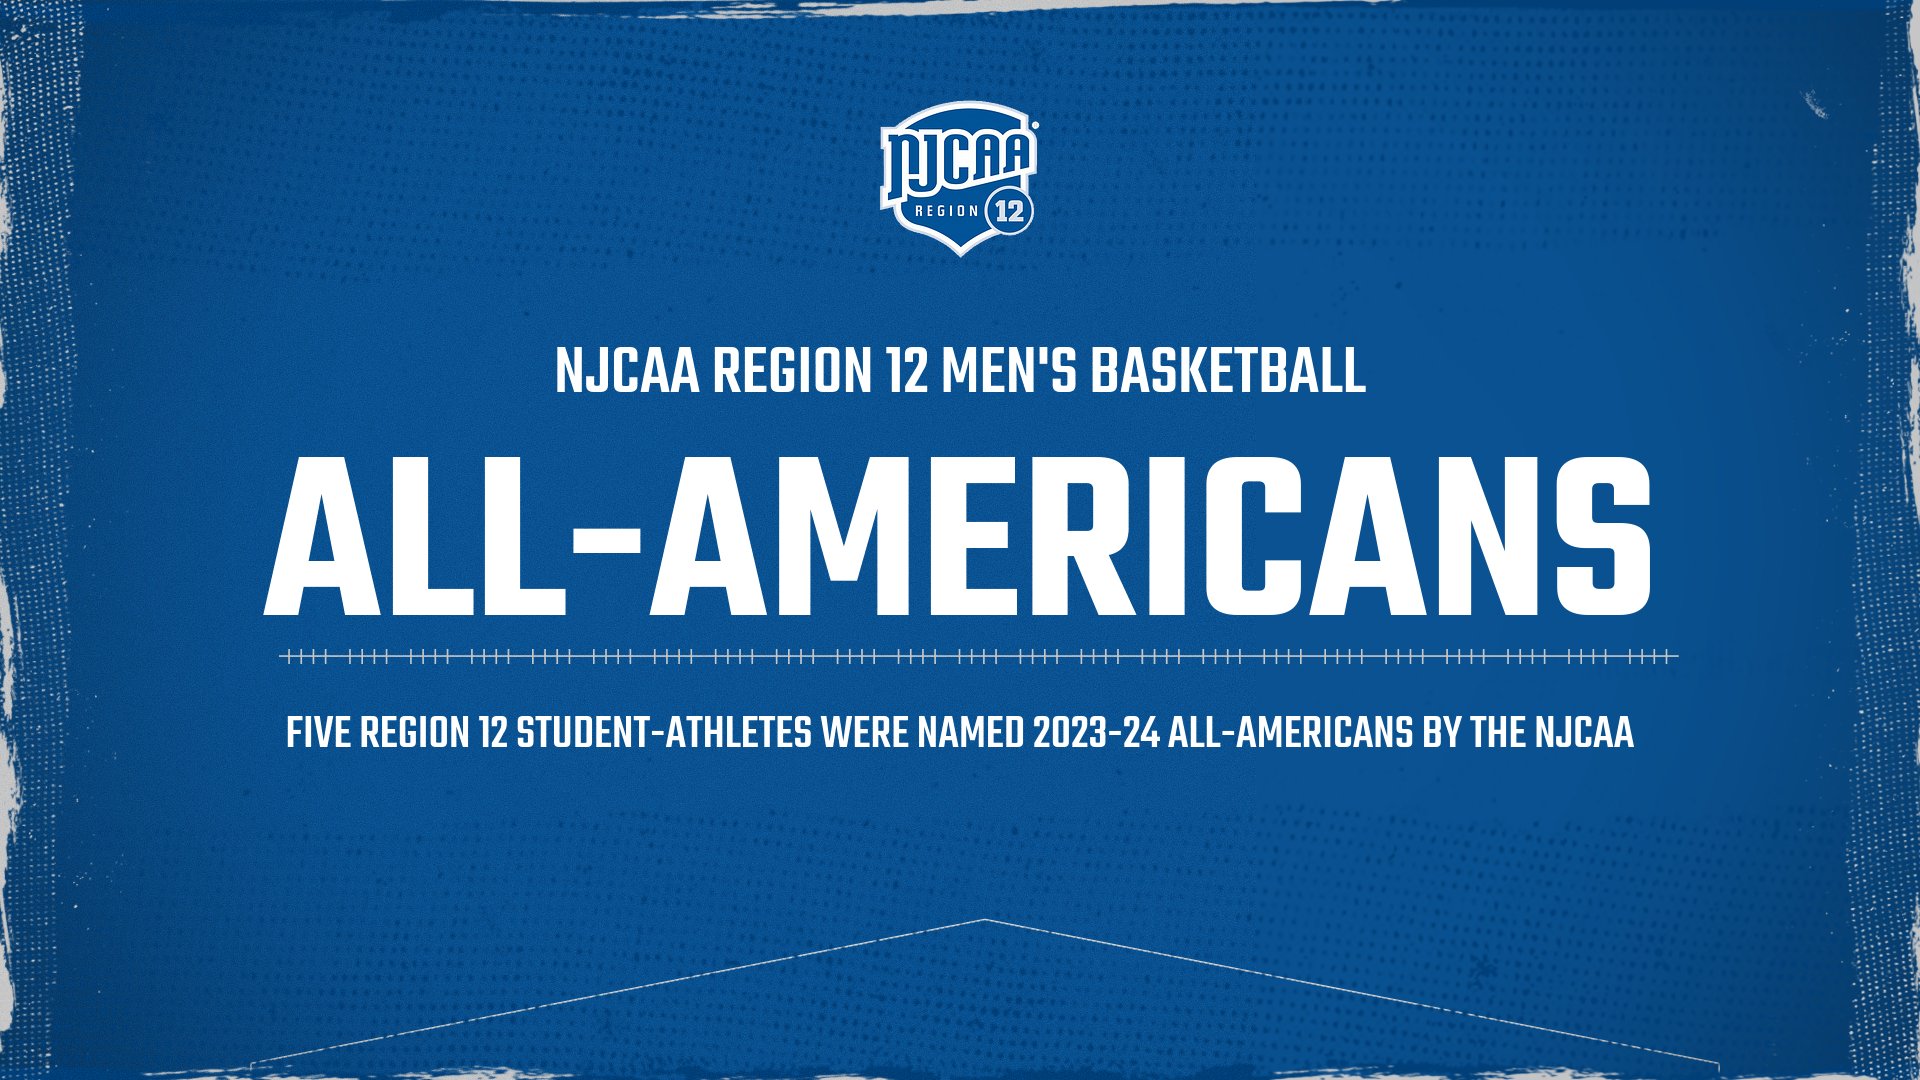 NJCAA Announces Men&rsquo;s Basketball All-Americans, Five Region 12 Student-Athletes Recognized